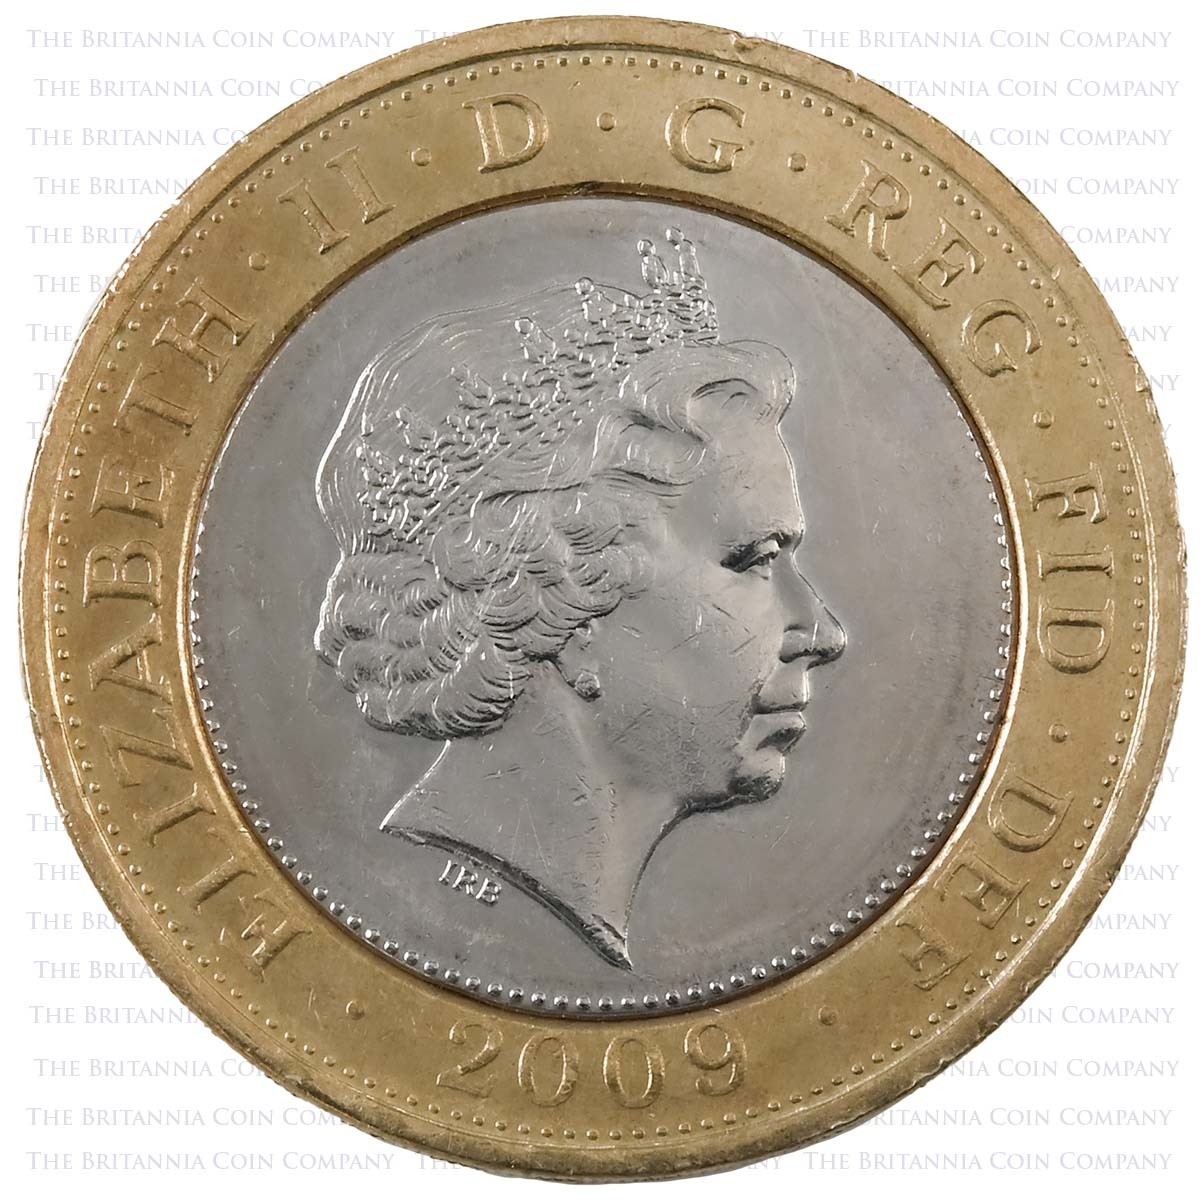 2009 Robert Burns Circulated Two Pound Coin Obverse